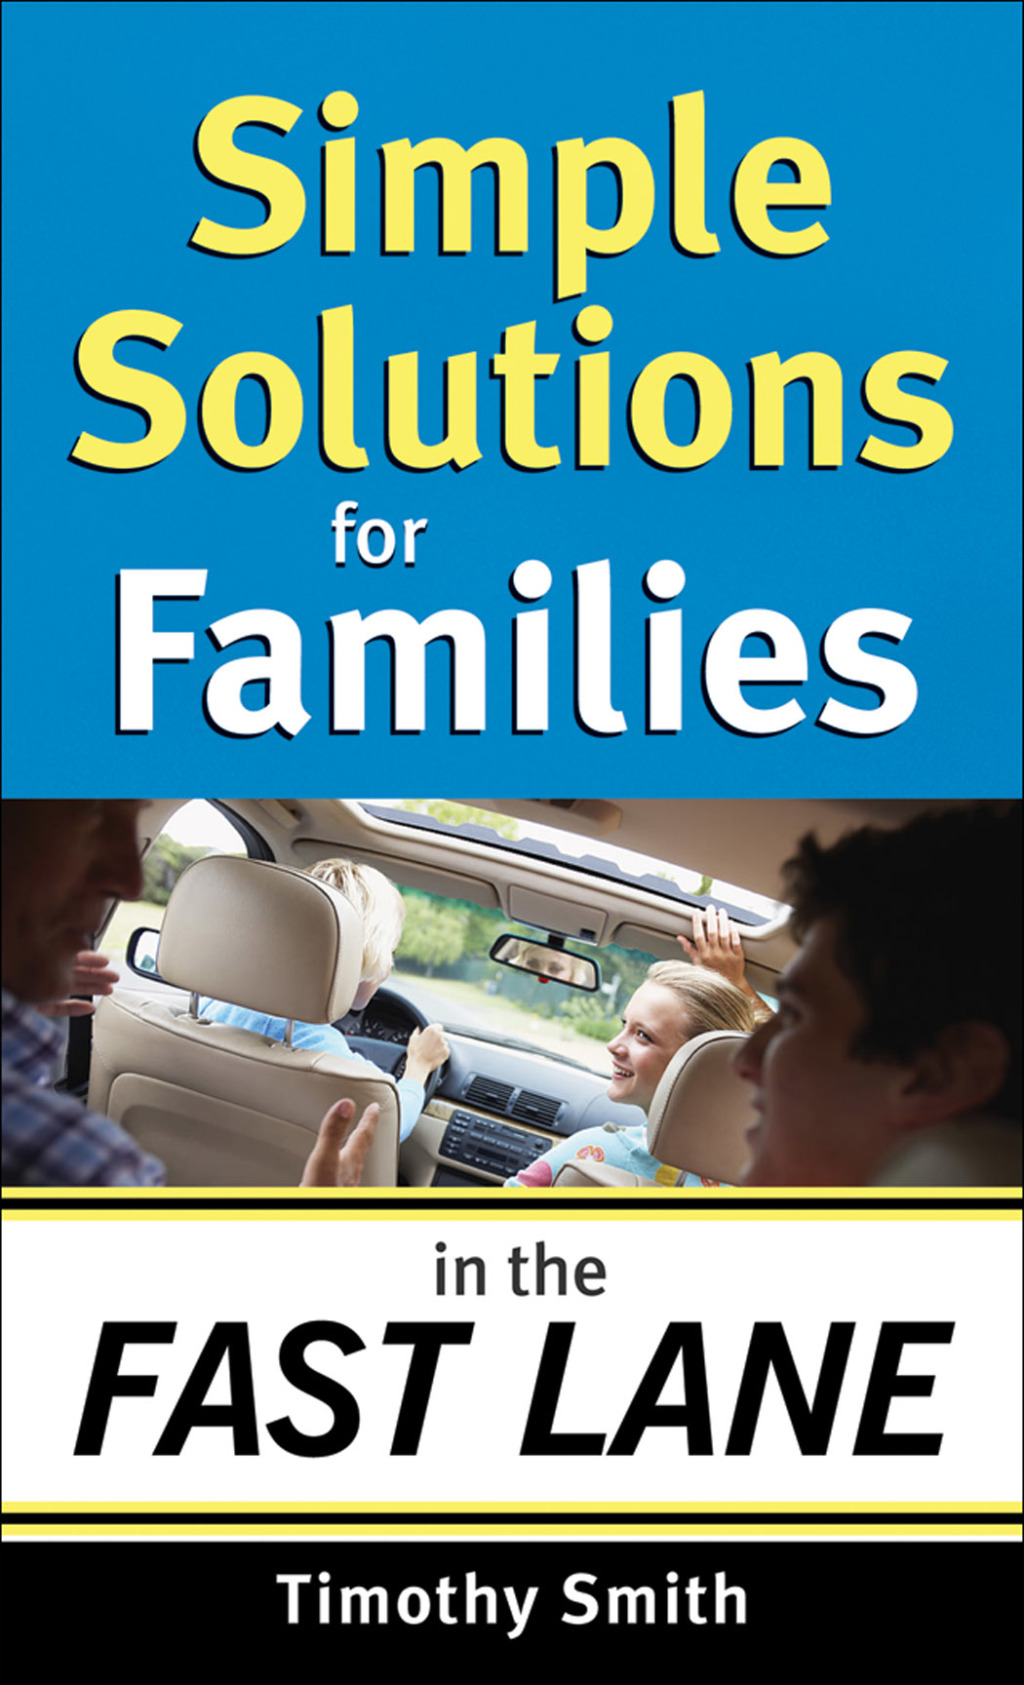 Simple Solutions for Families in the Fast Lane (eBook) - Timothy Smith